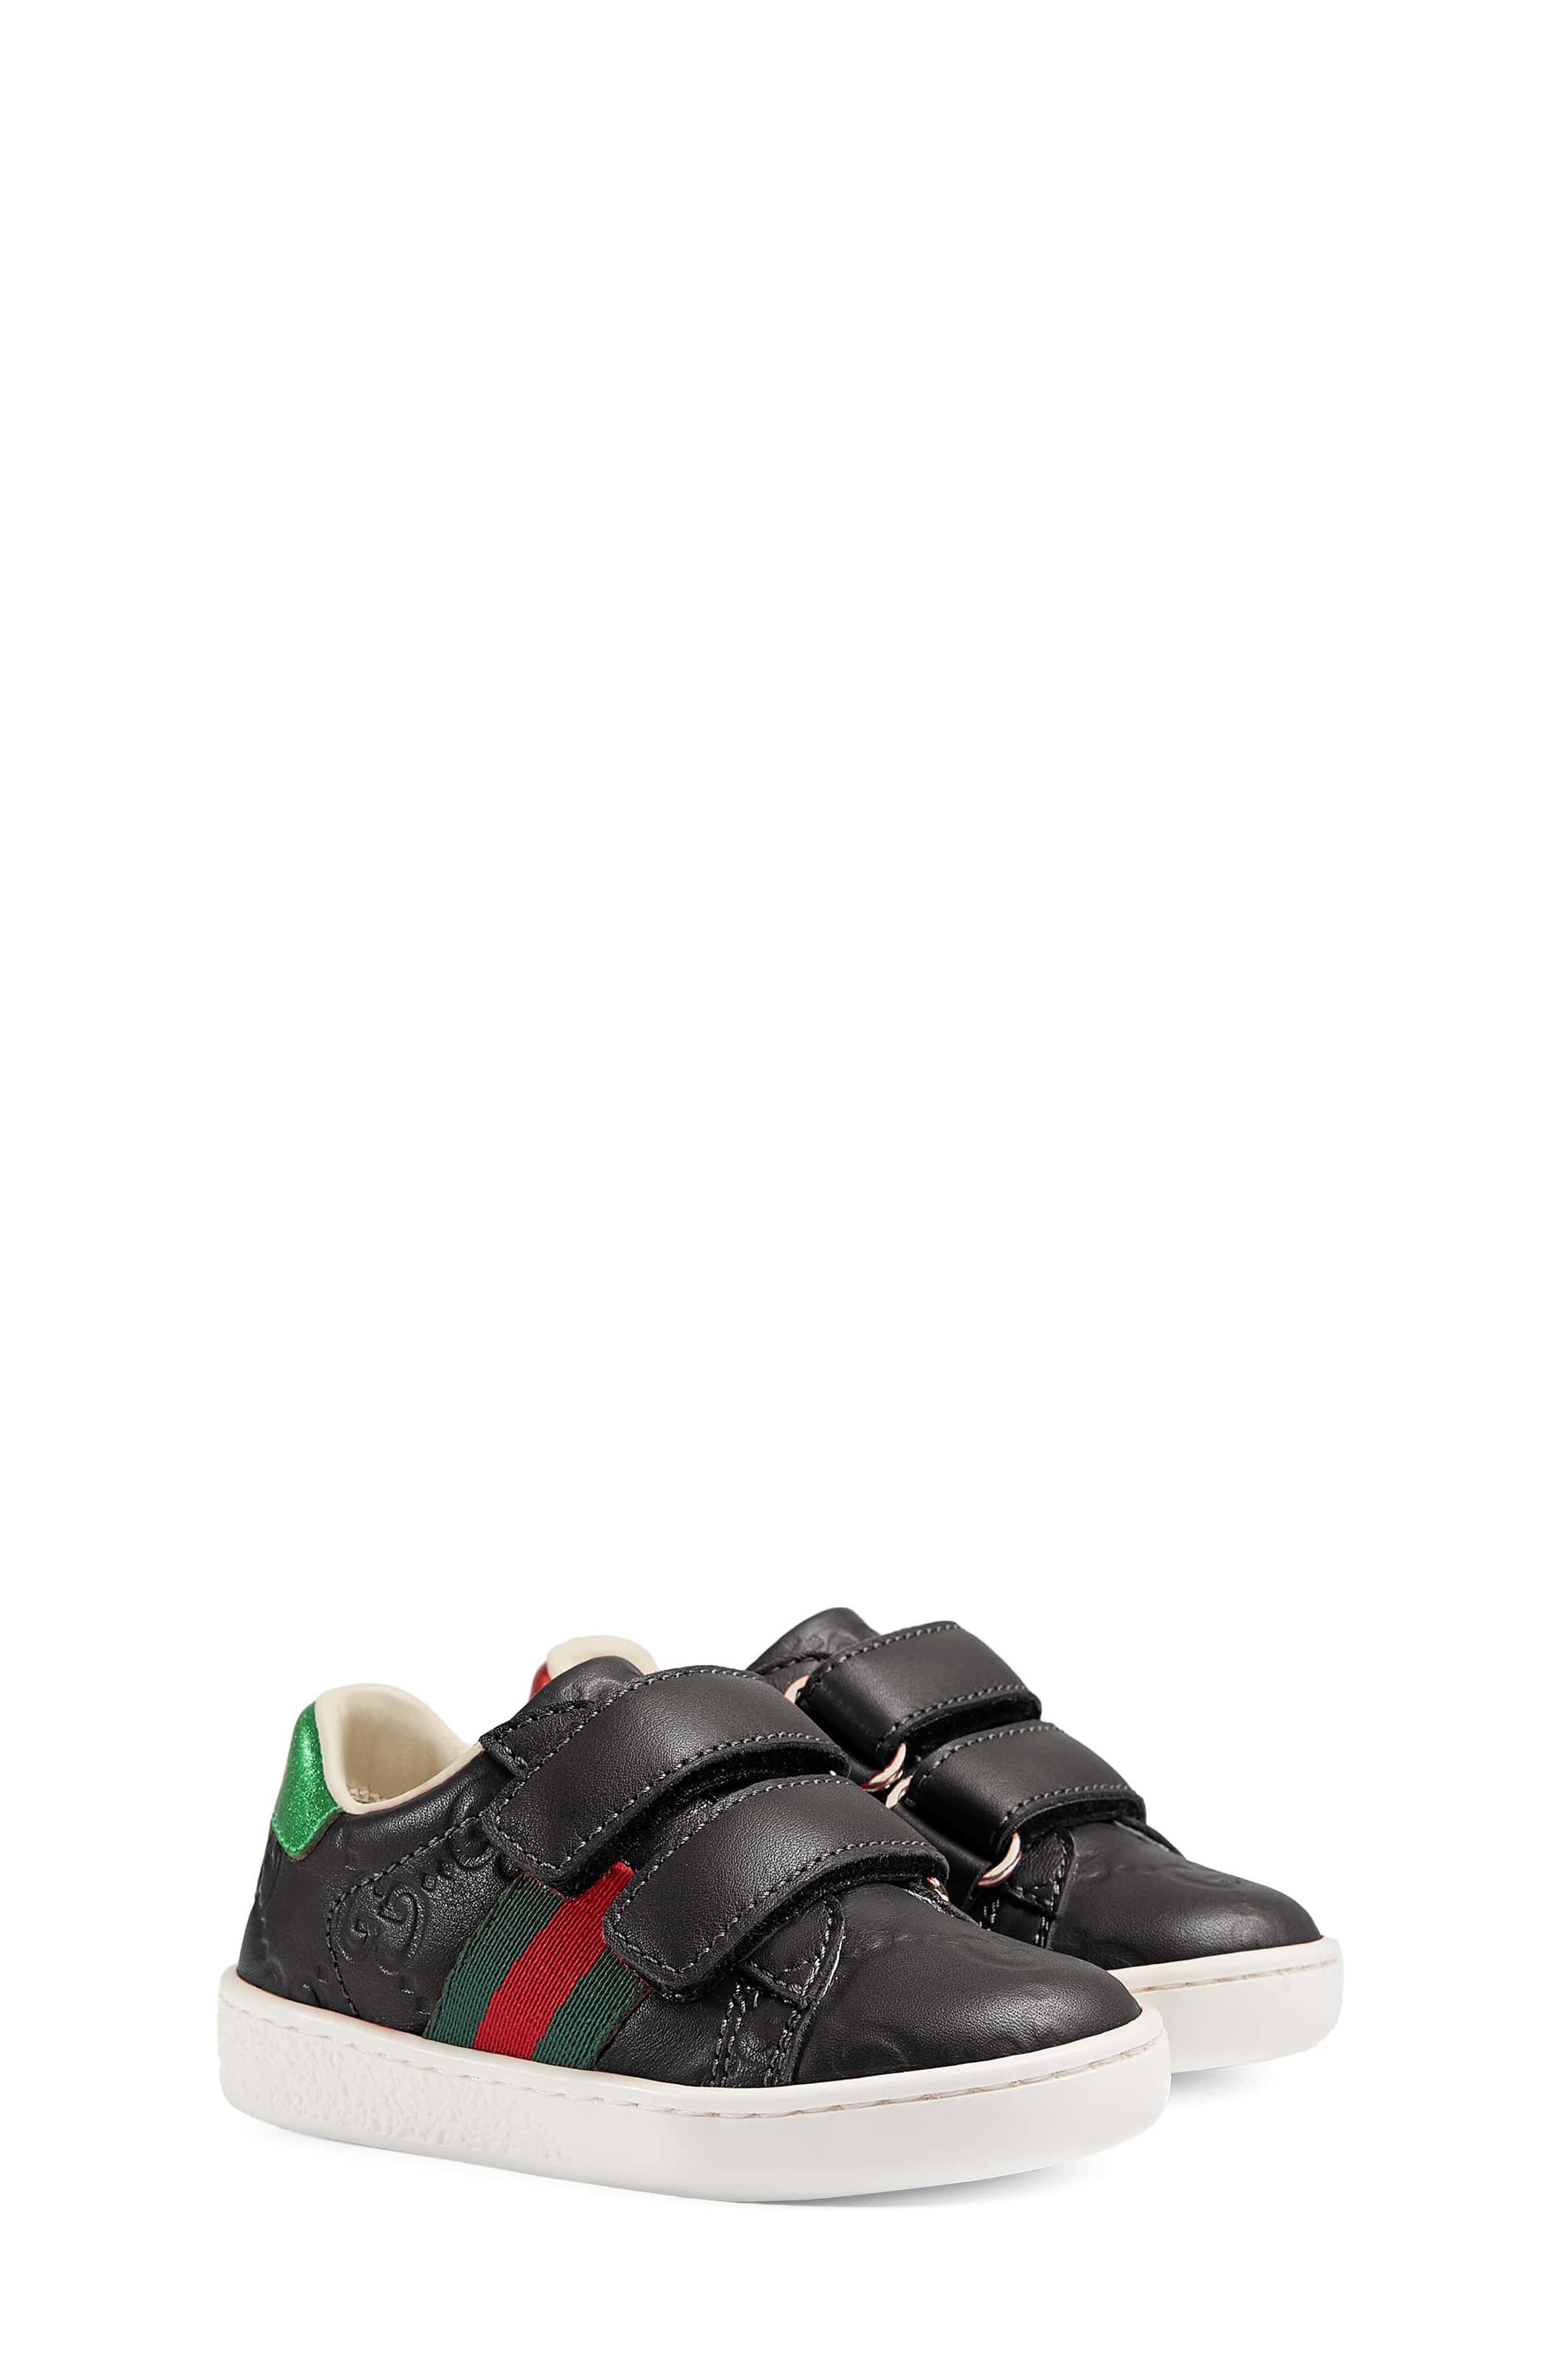 gucci shoes for boys price